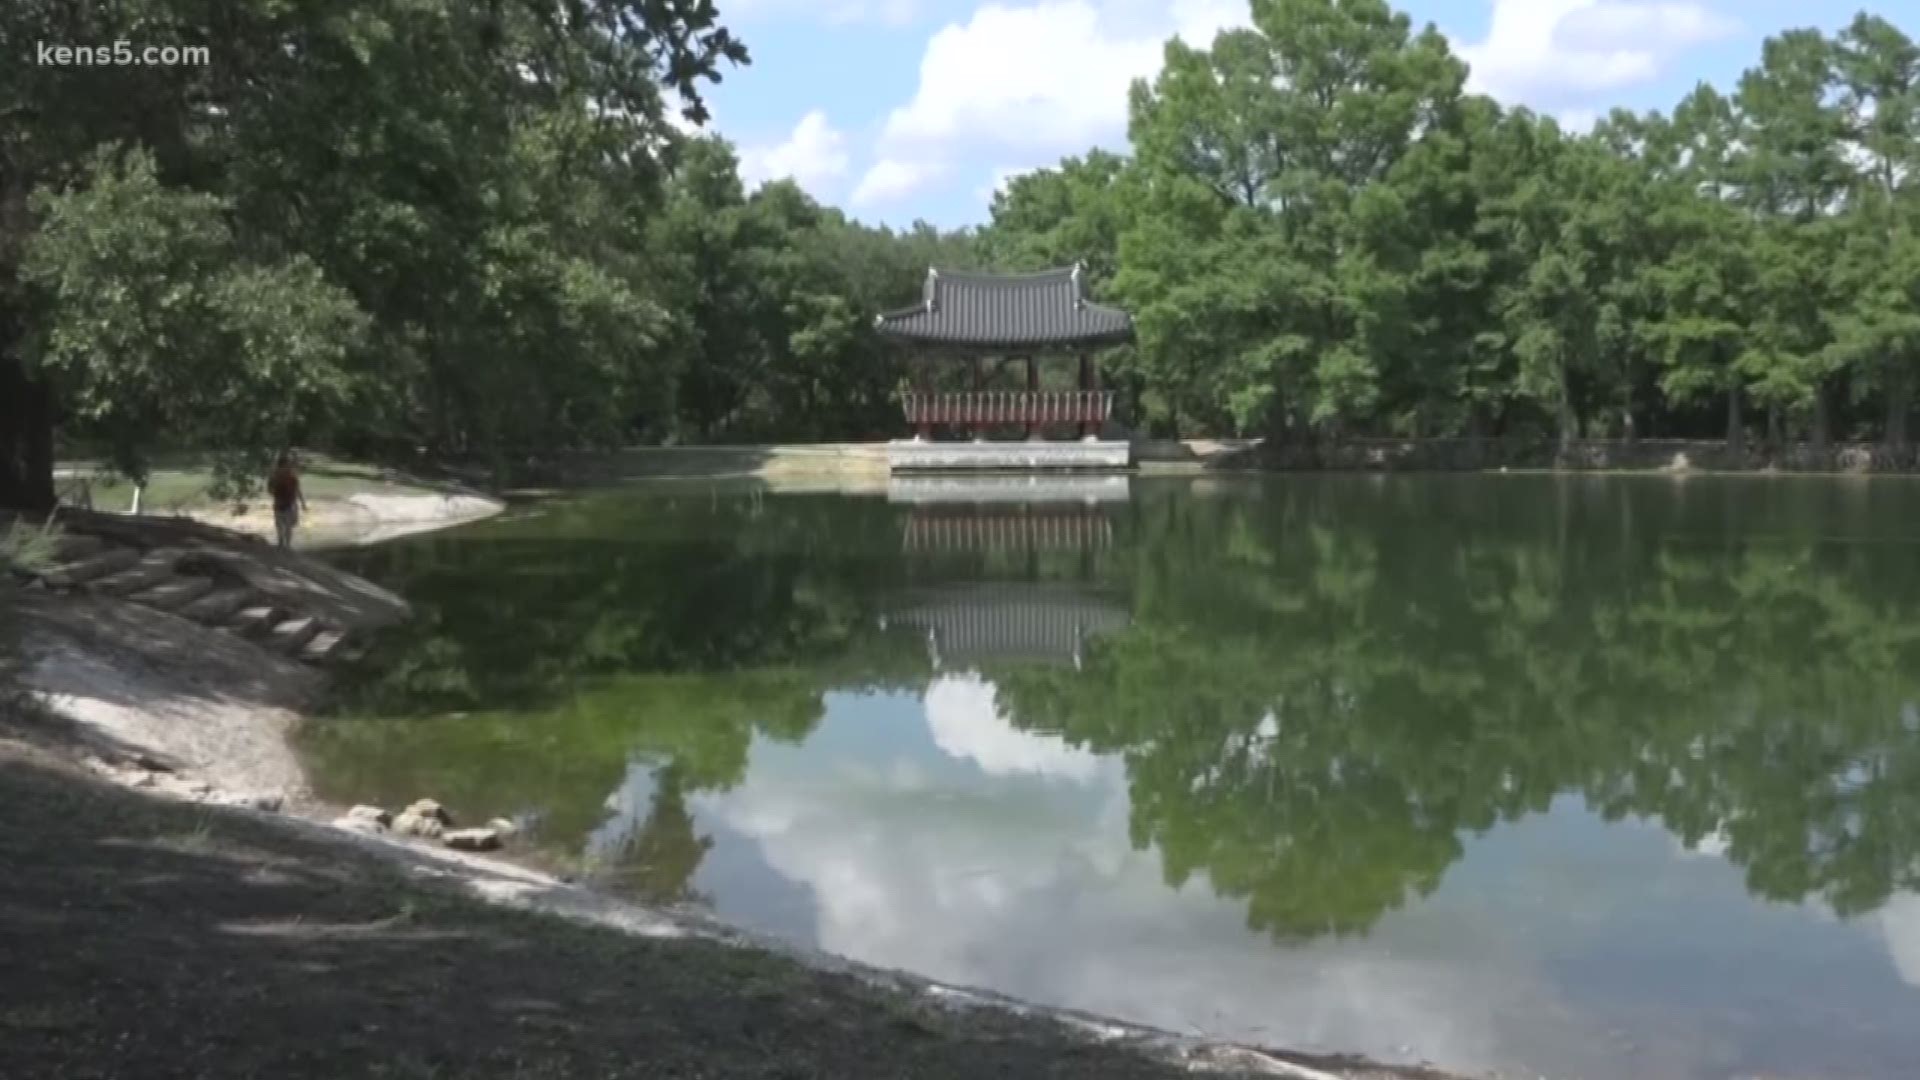 San Antonio's Parks and Recreation Department finally announced plans to repair the pond at Denman Estate Park while saving the wildlife in the area.